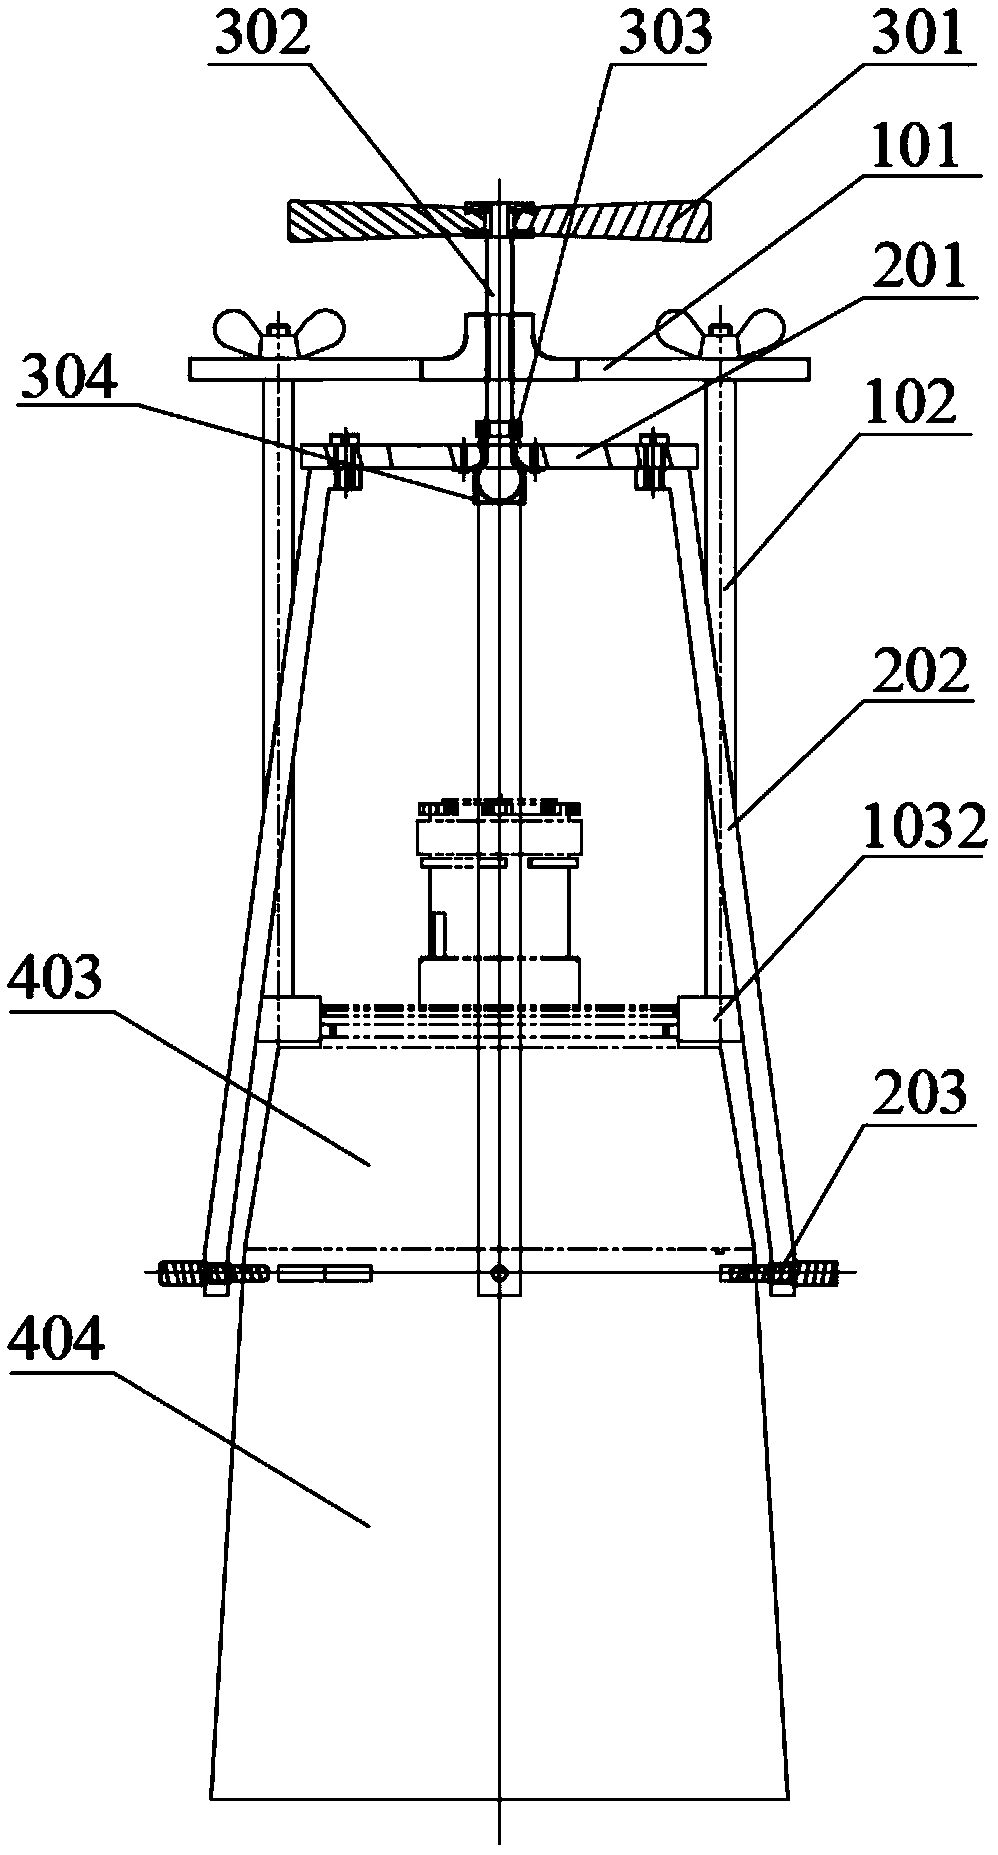 Disassembling device suitable for cone shell assembly